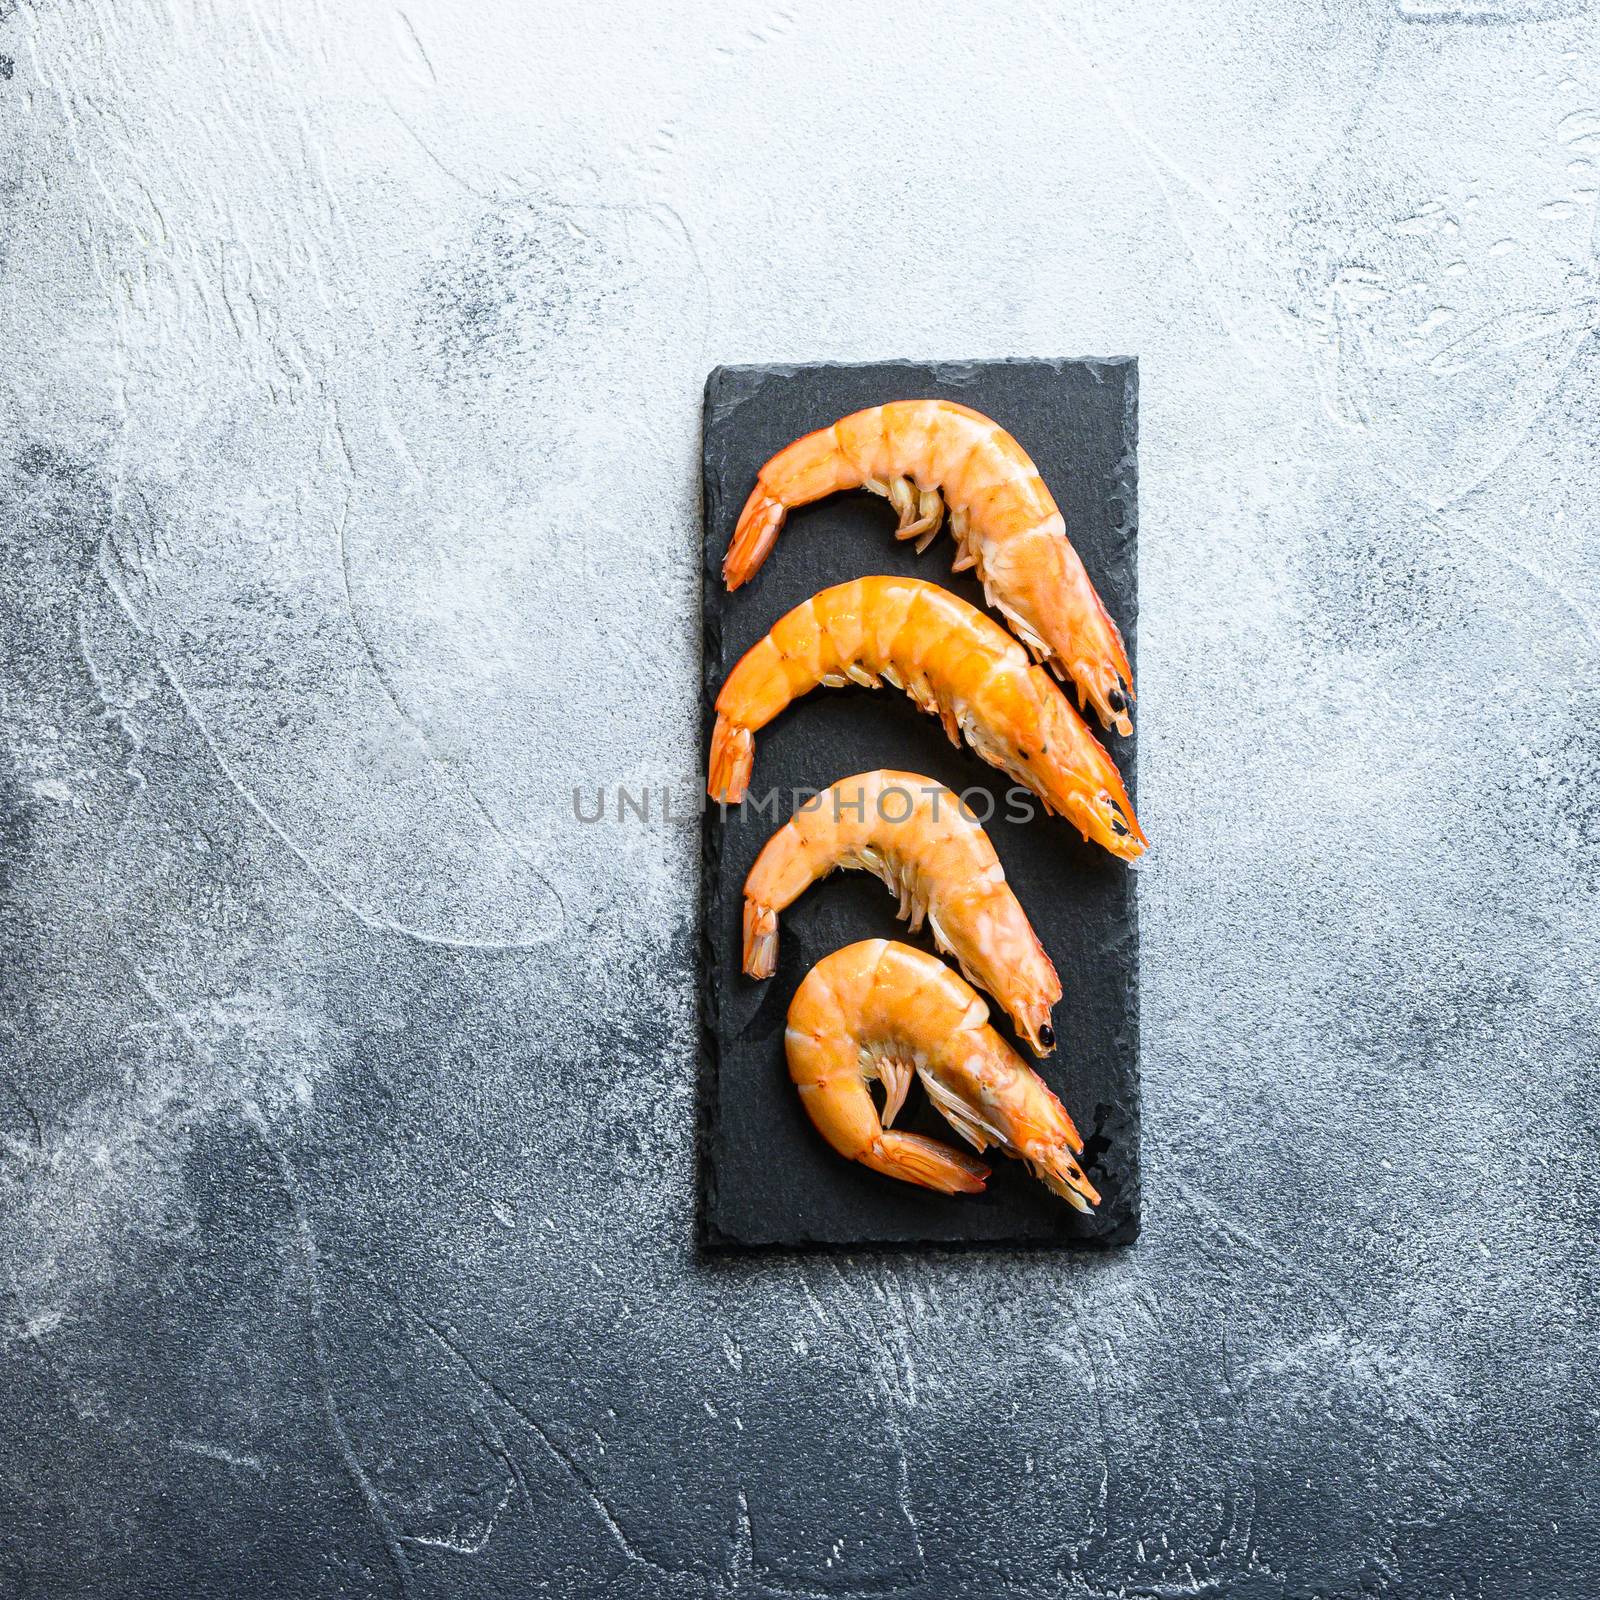 shrimp on a stone cutting board over textured grey white backgrounnd, top view, closeup space for text by Ilianesolenyi